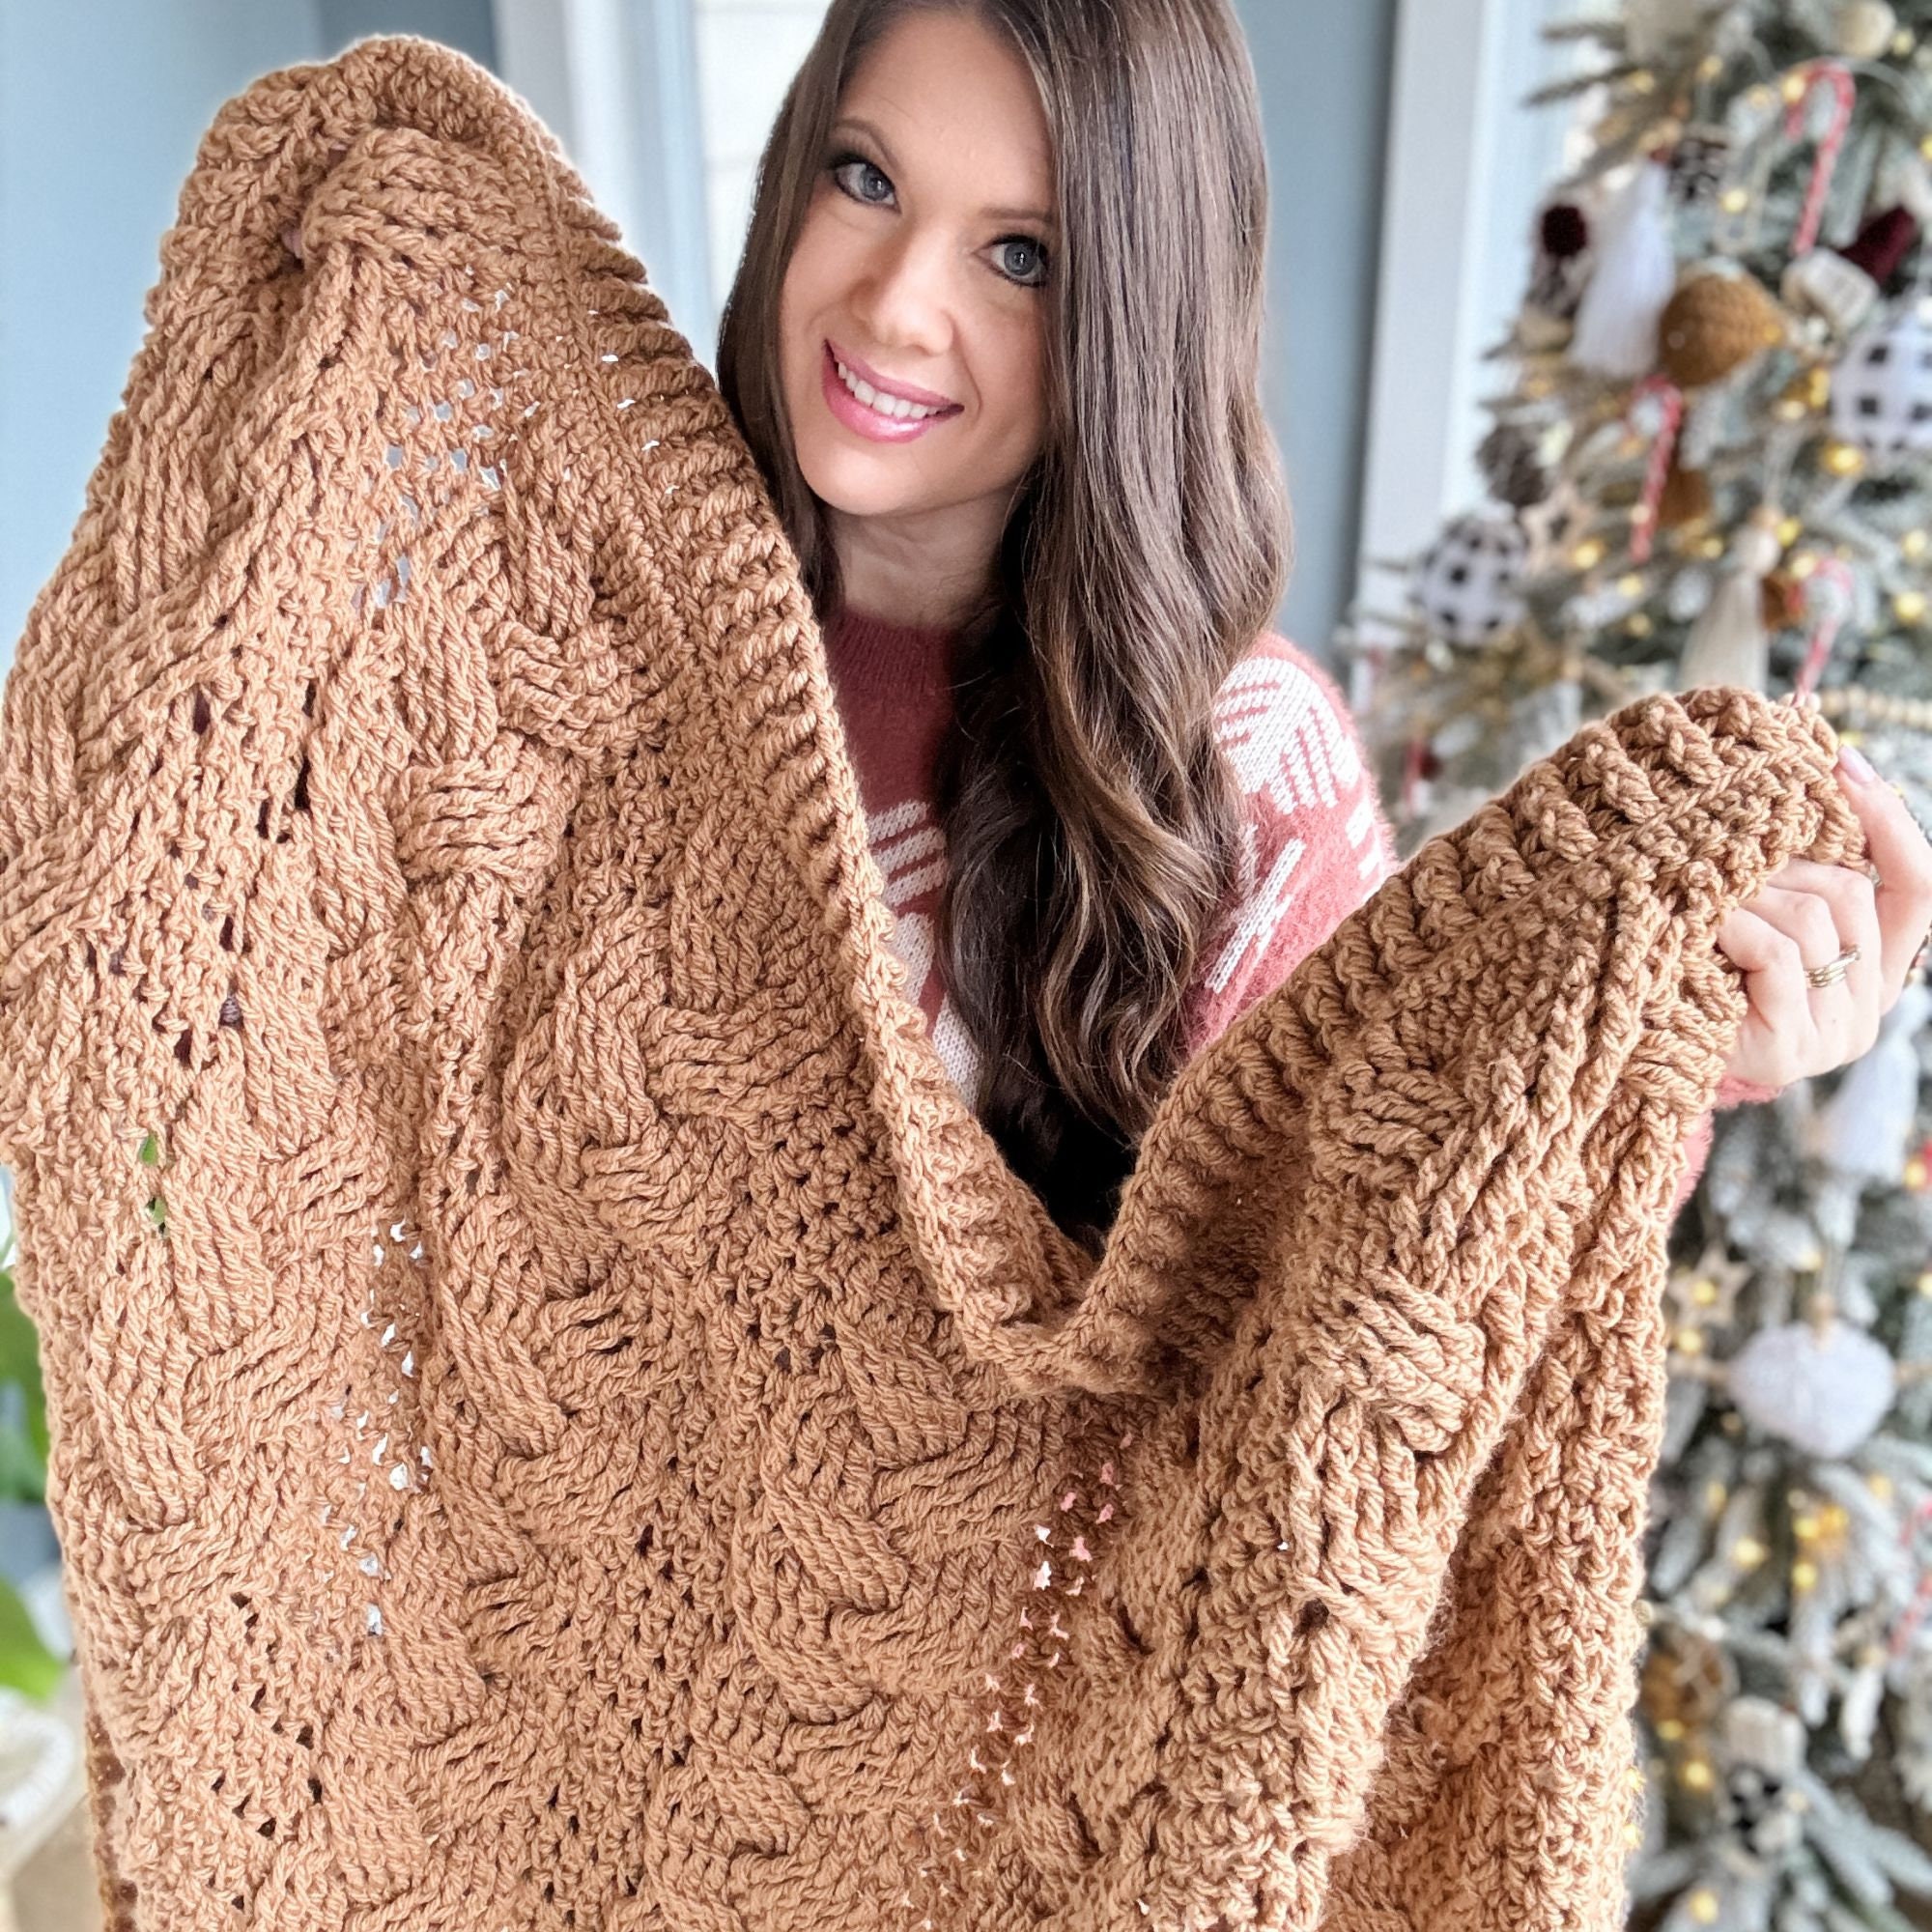 19 Cozy Cable Blanket Crochet Patterns to Make: Update Your Home - A More  Crafty Life